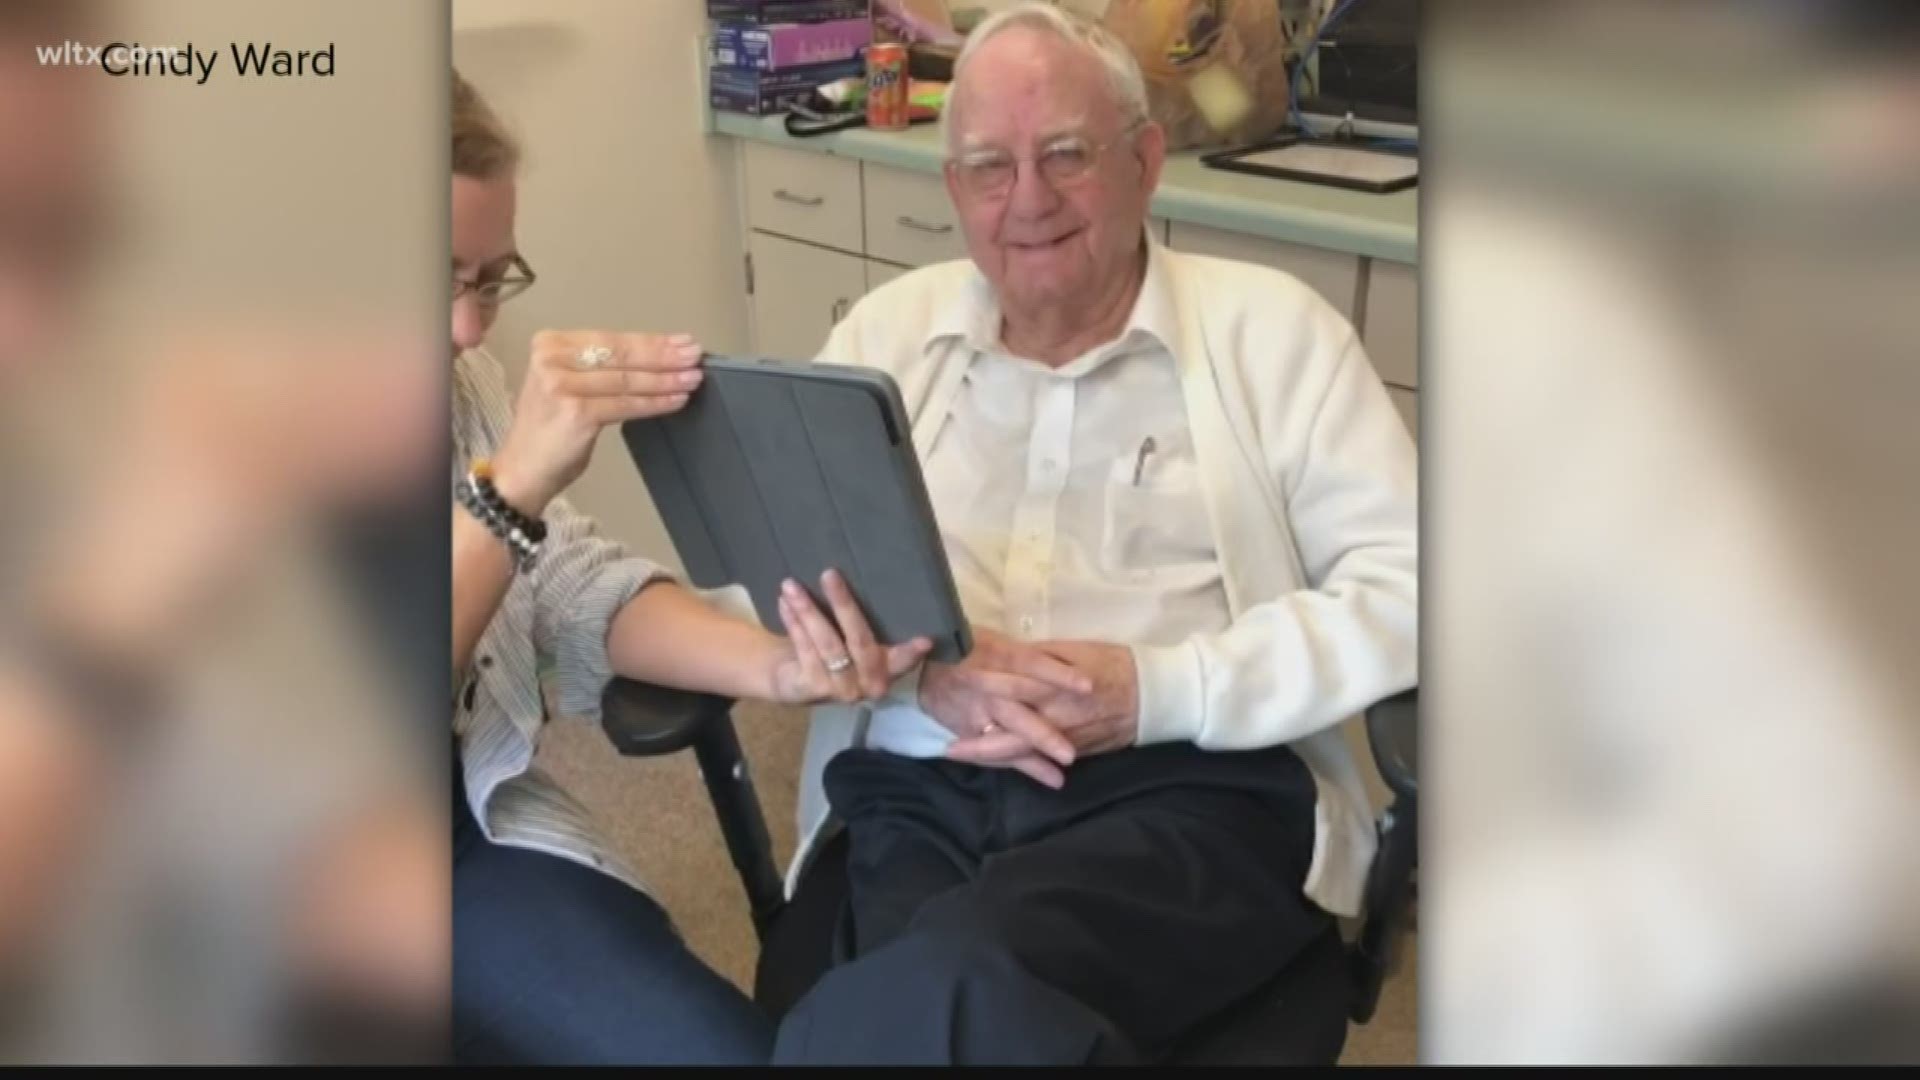 Hugh and Nather Gray have been married for 68 years. The Columbia Presbyterian Community staff helped them go on a FaceTime date.